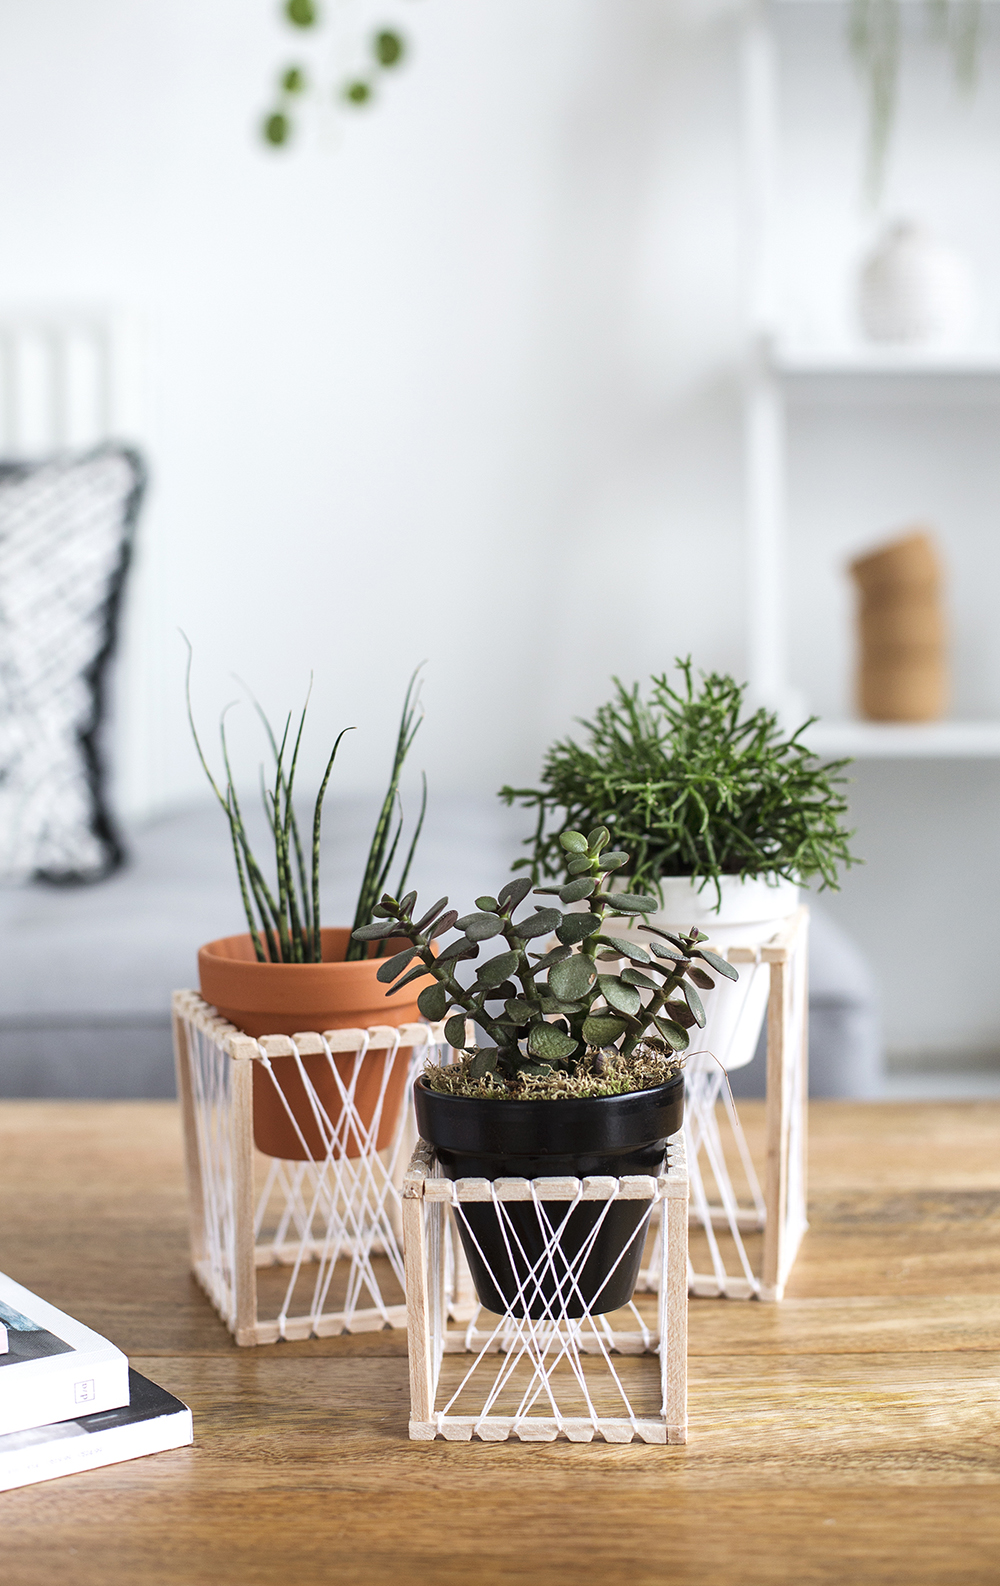 DIY Woven Plant Stand by The Lovely Drawer